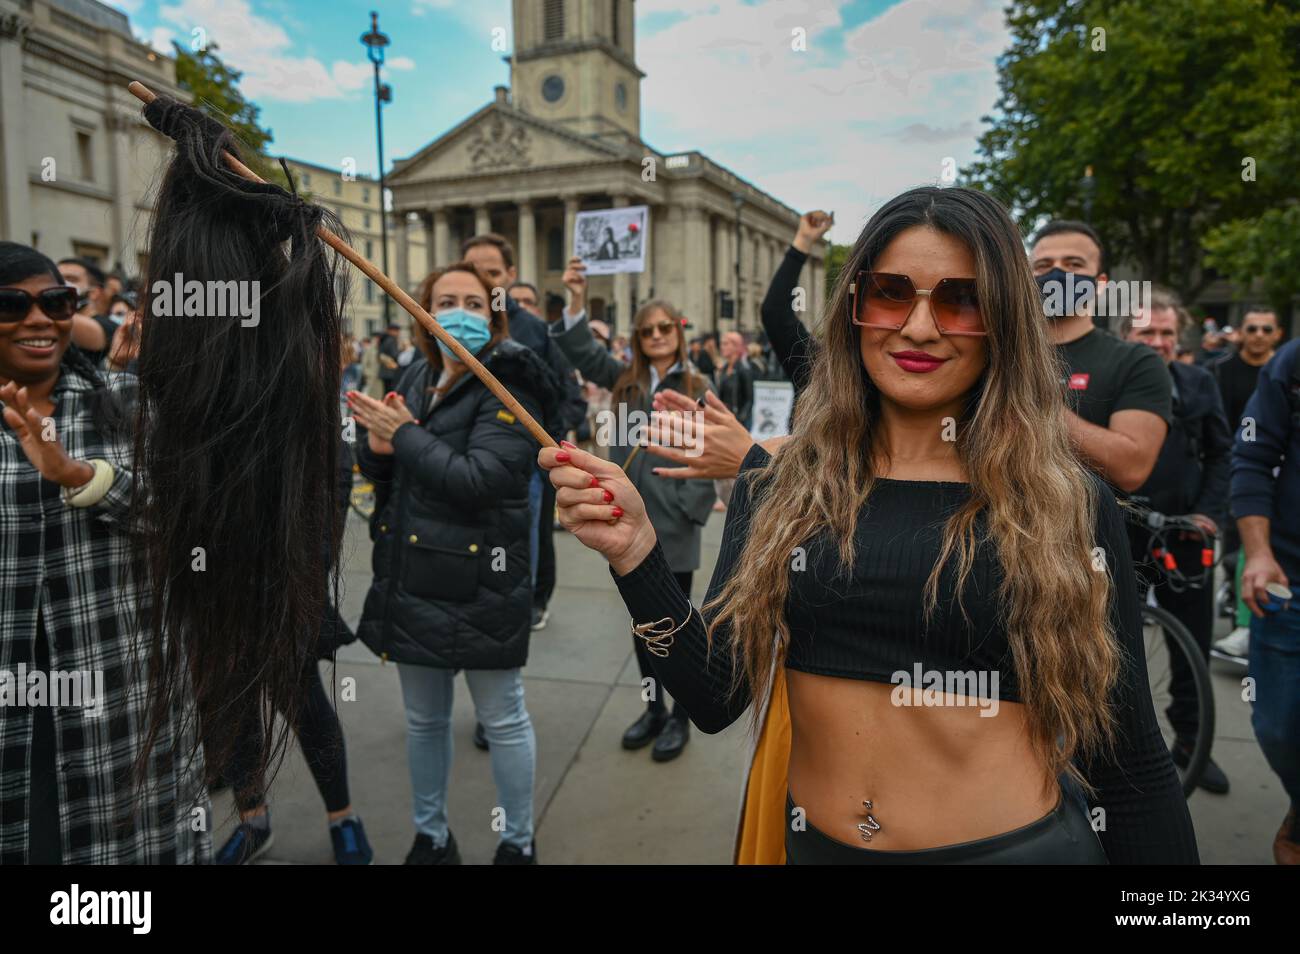 Protest continues in Trafalgar square of the the unlawful death of Mahsa Amini allege morality police murder Mahsa Amini for wearing an inappropriate hijab. London, UK. 24th September 2022. Stock Photo